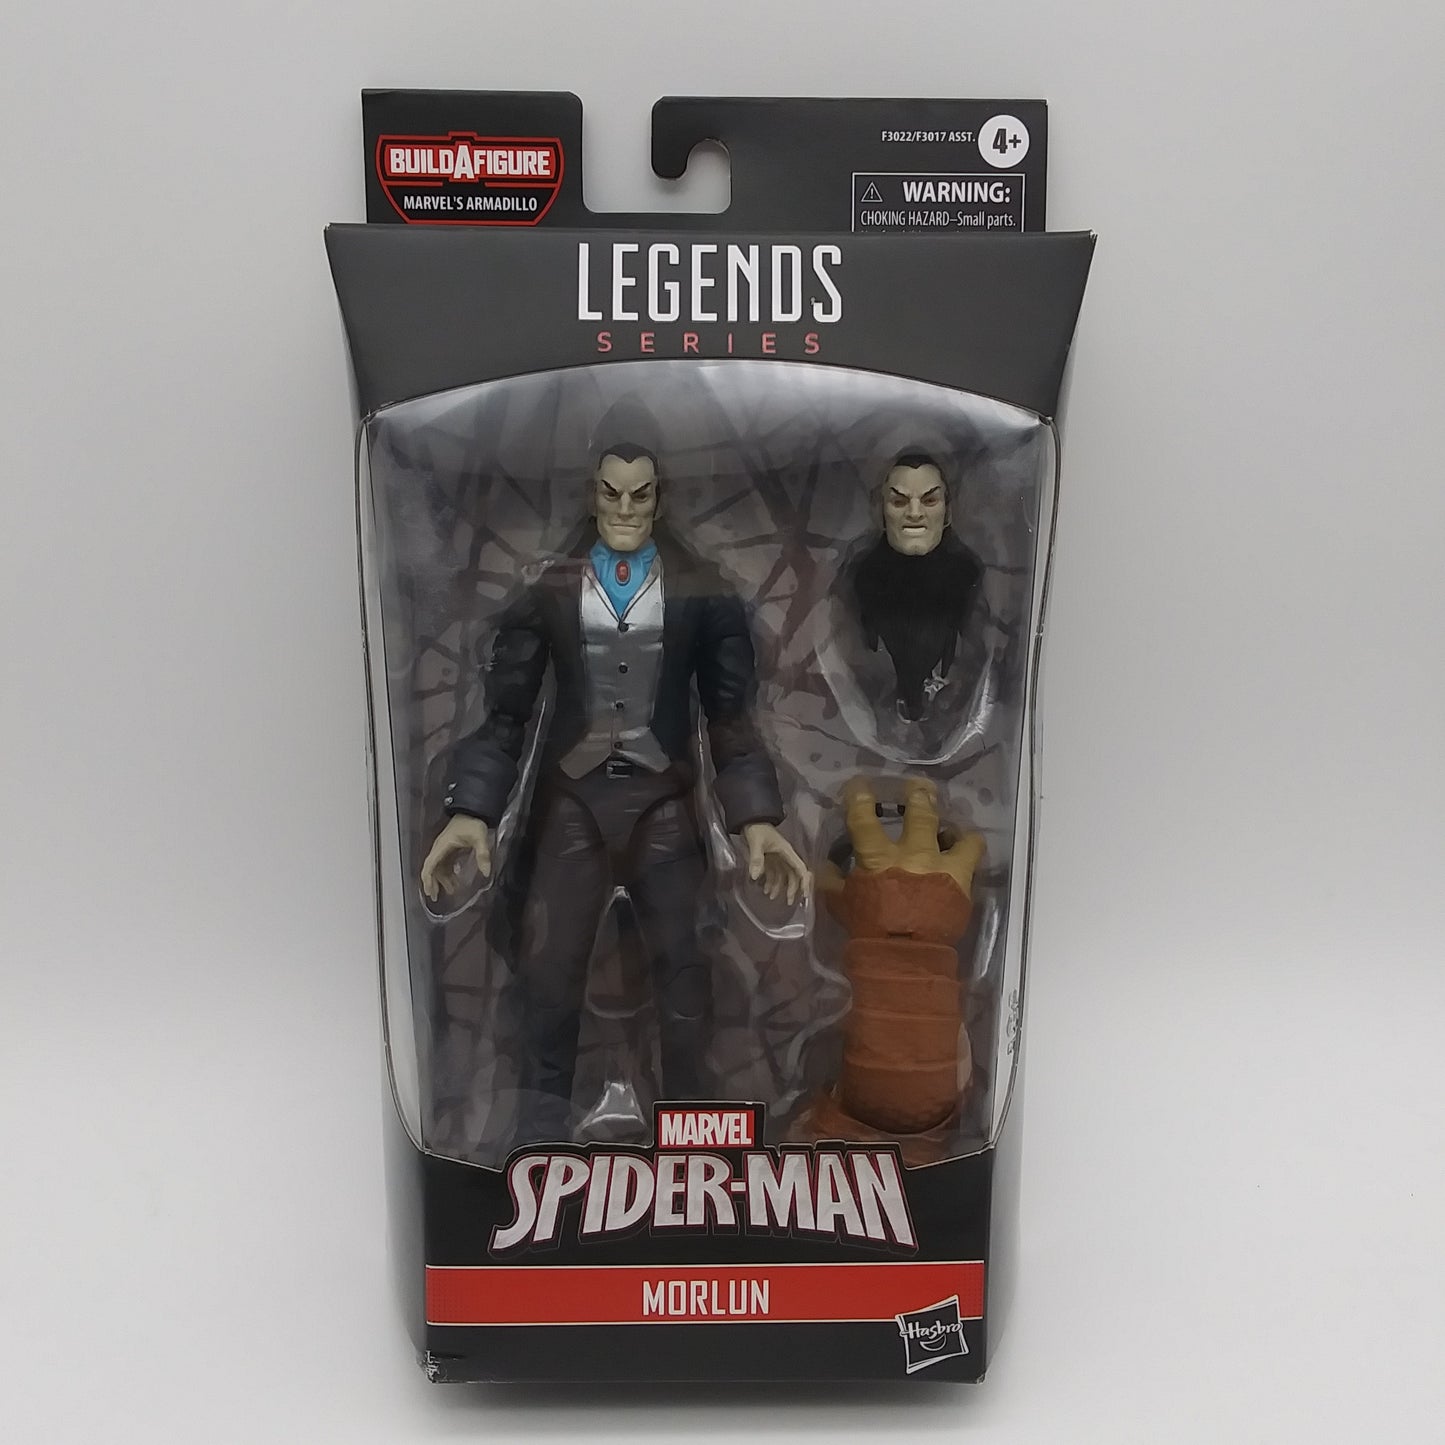 The front of the box and bubble. The bubble is sealed, the action figure inside.